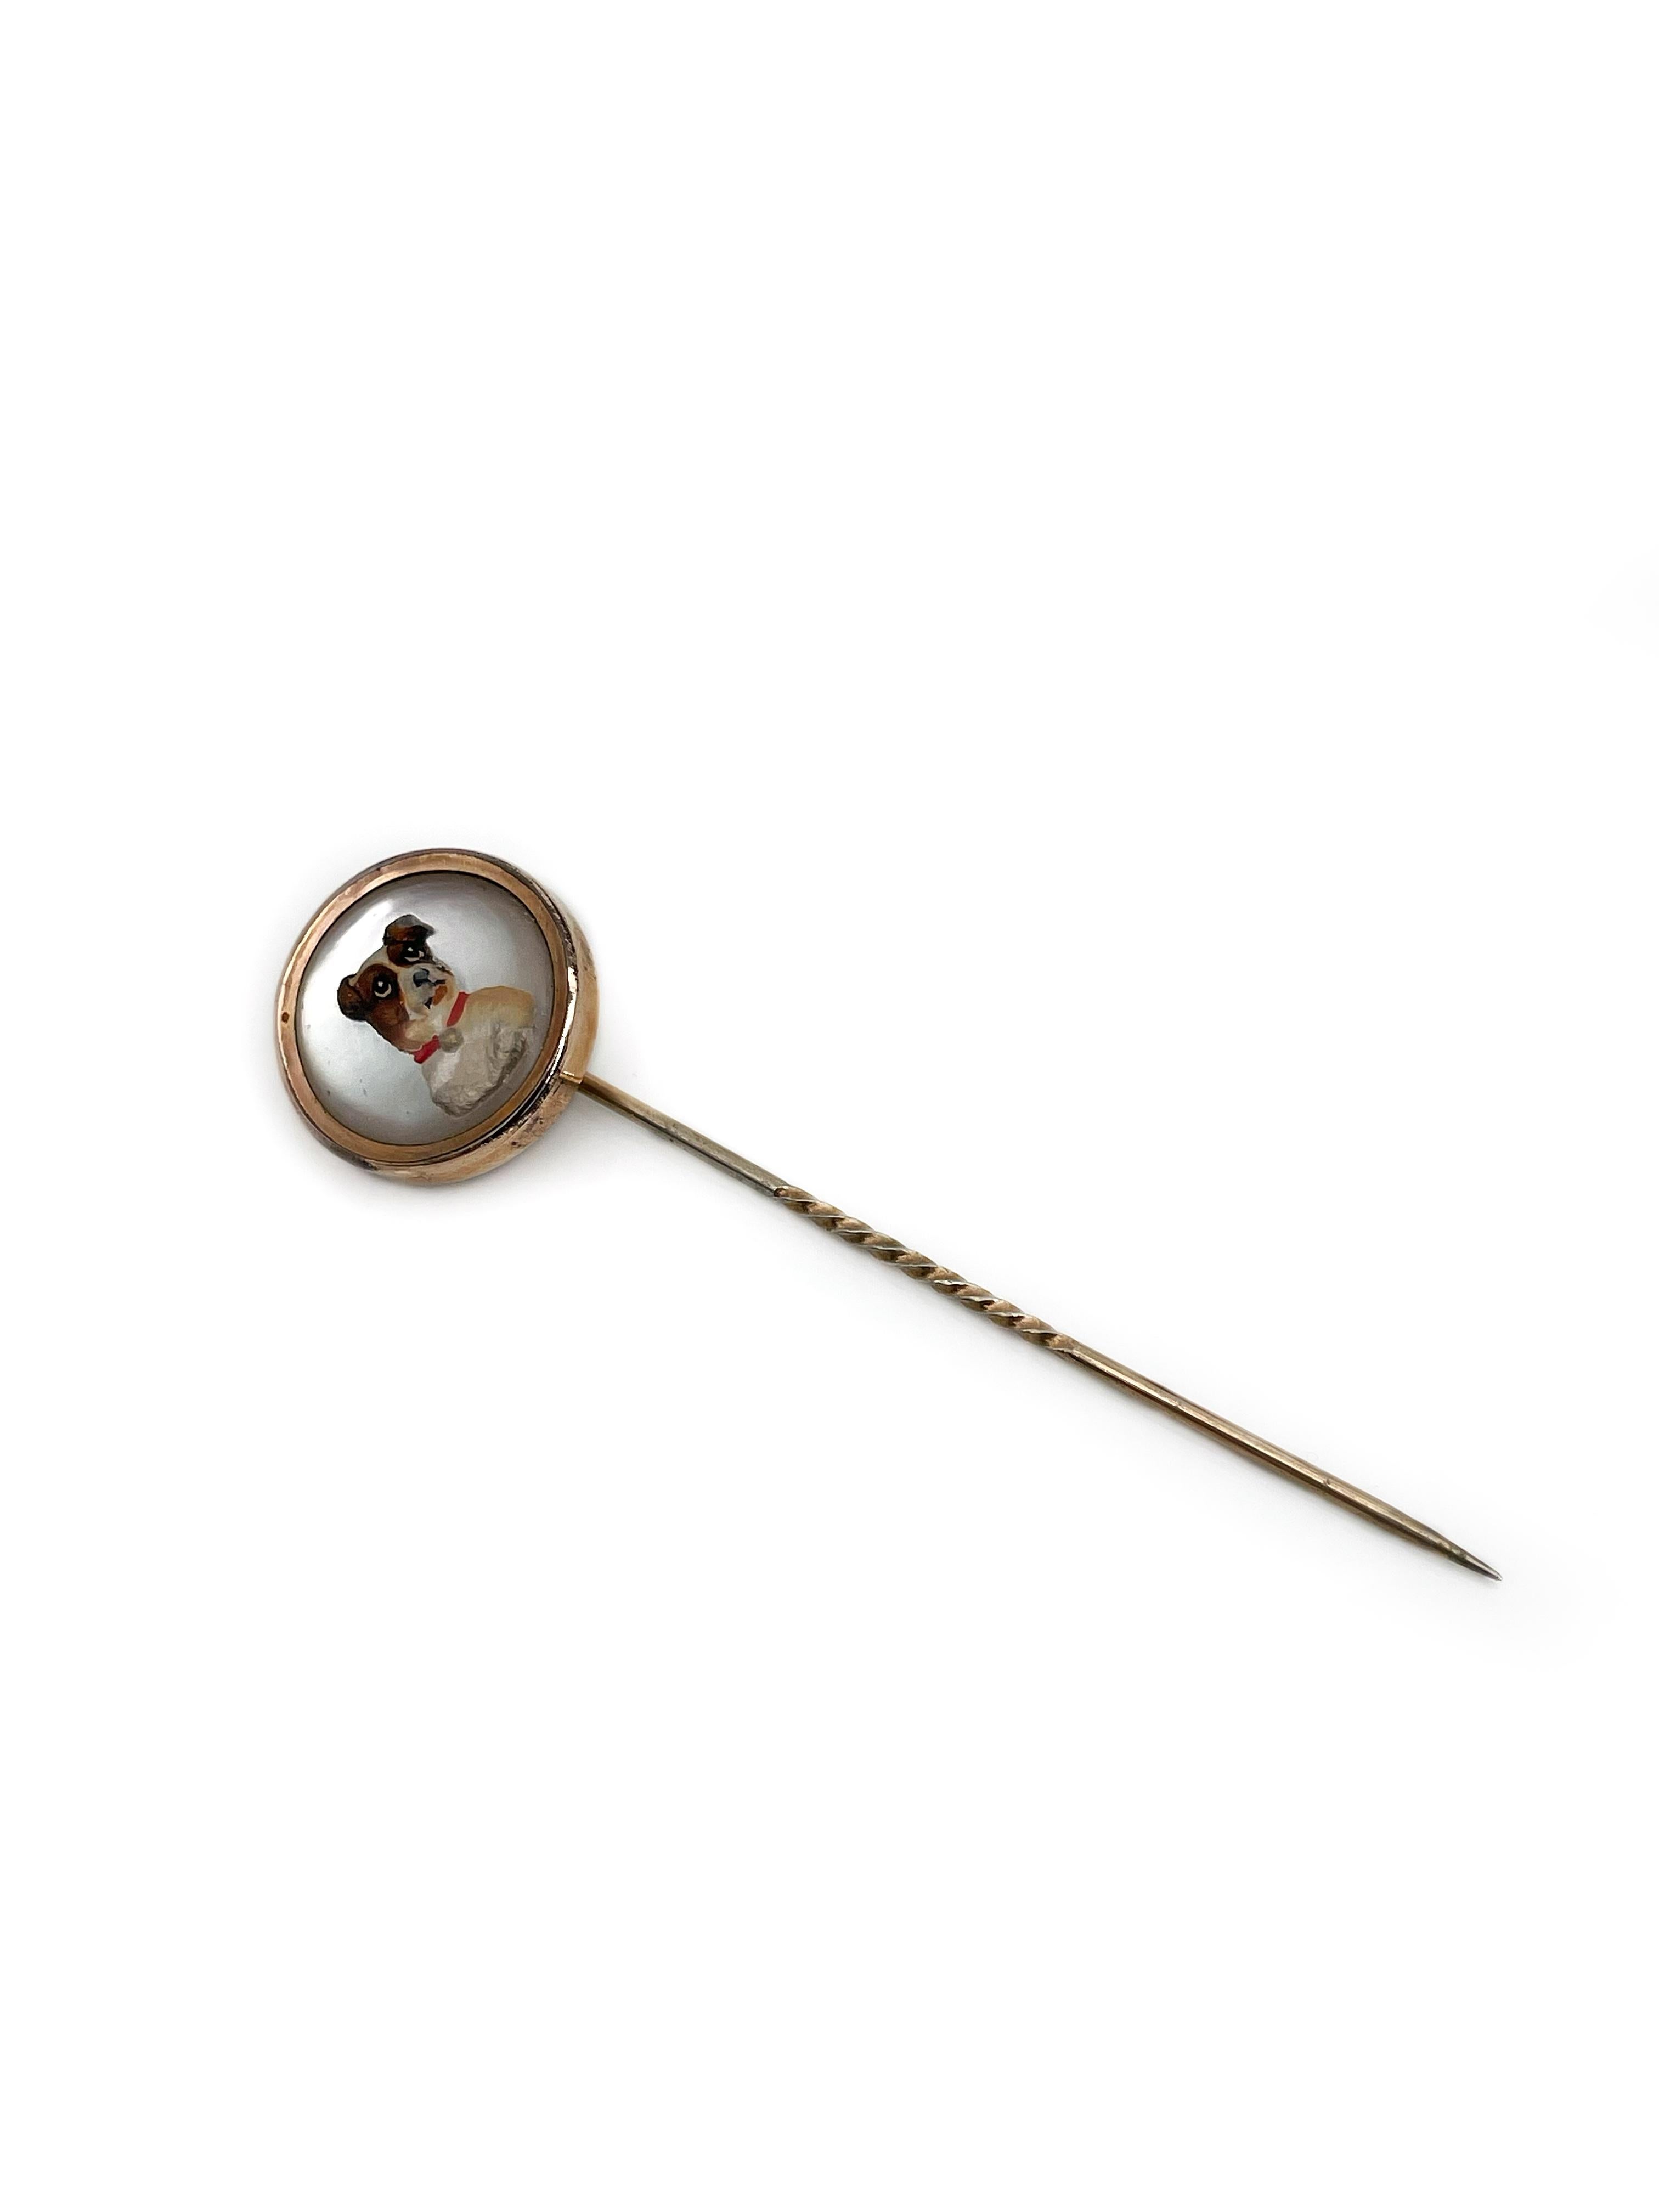 This is an antique Victorian stick pin brooch crafted in 14K gold depicting a cute Jack Russell Terrier. The circular detail is made of cabochon cut rock crystal. The picture of a dog is hand drawn and is remarkably lifelike. 

The piece is made